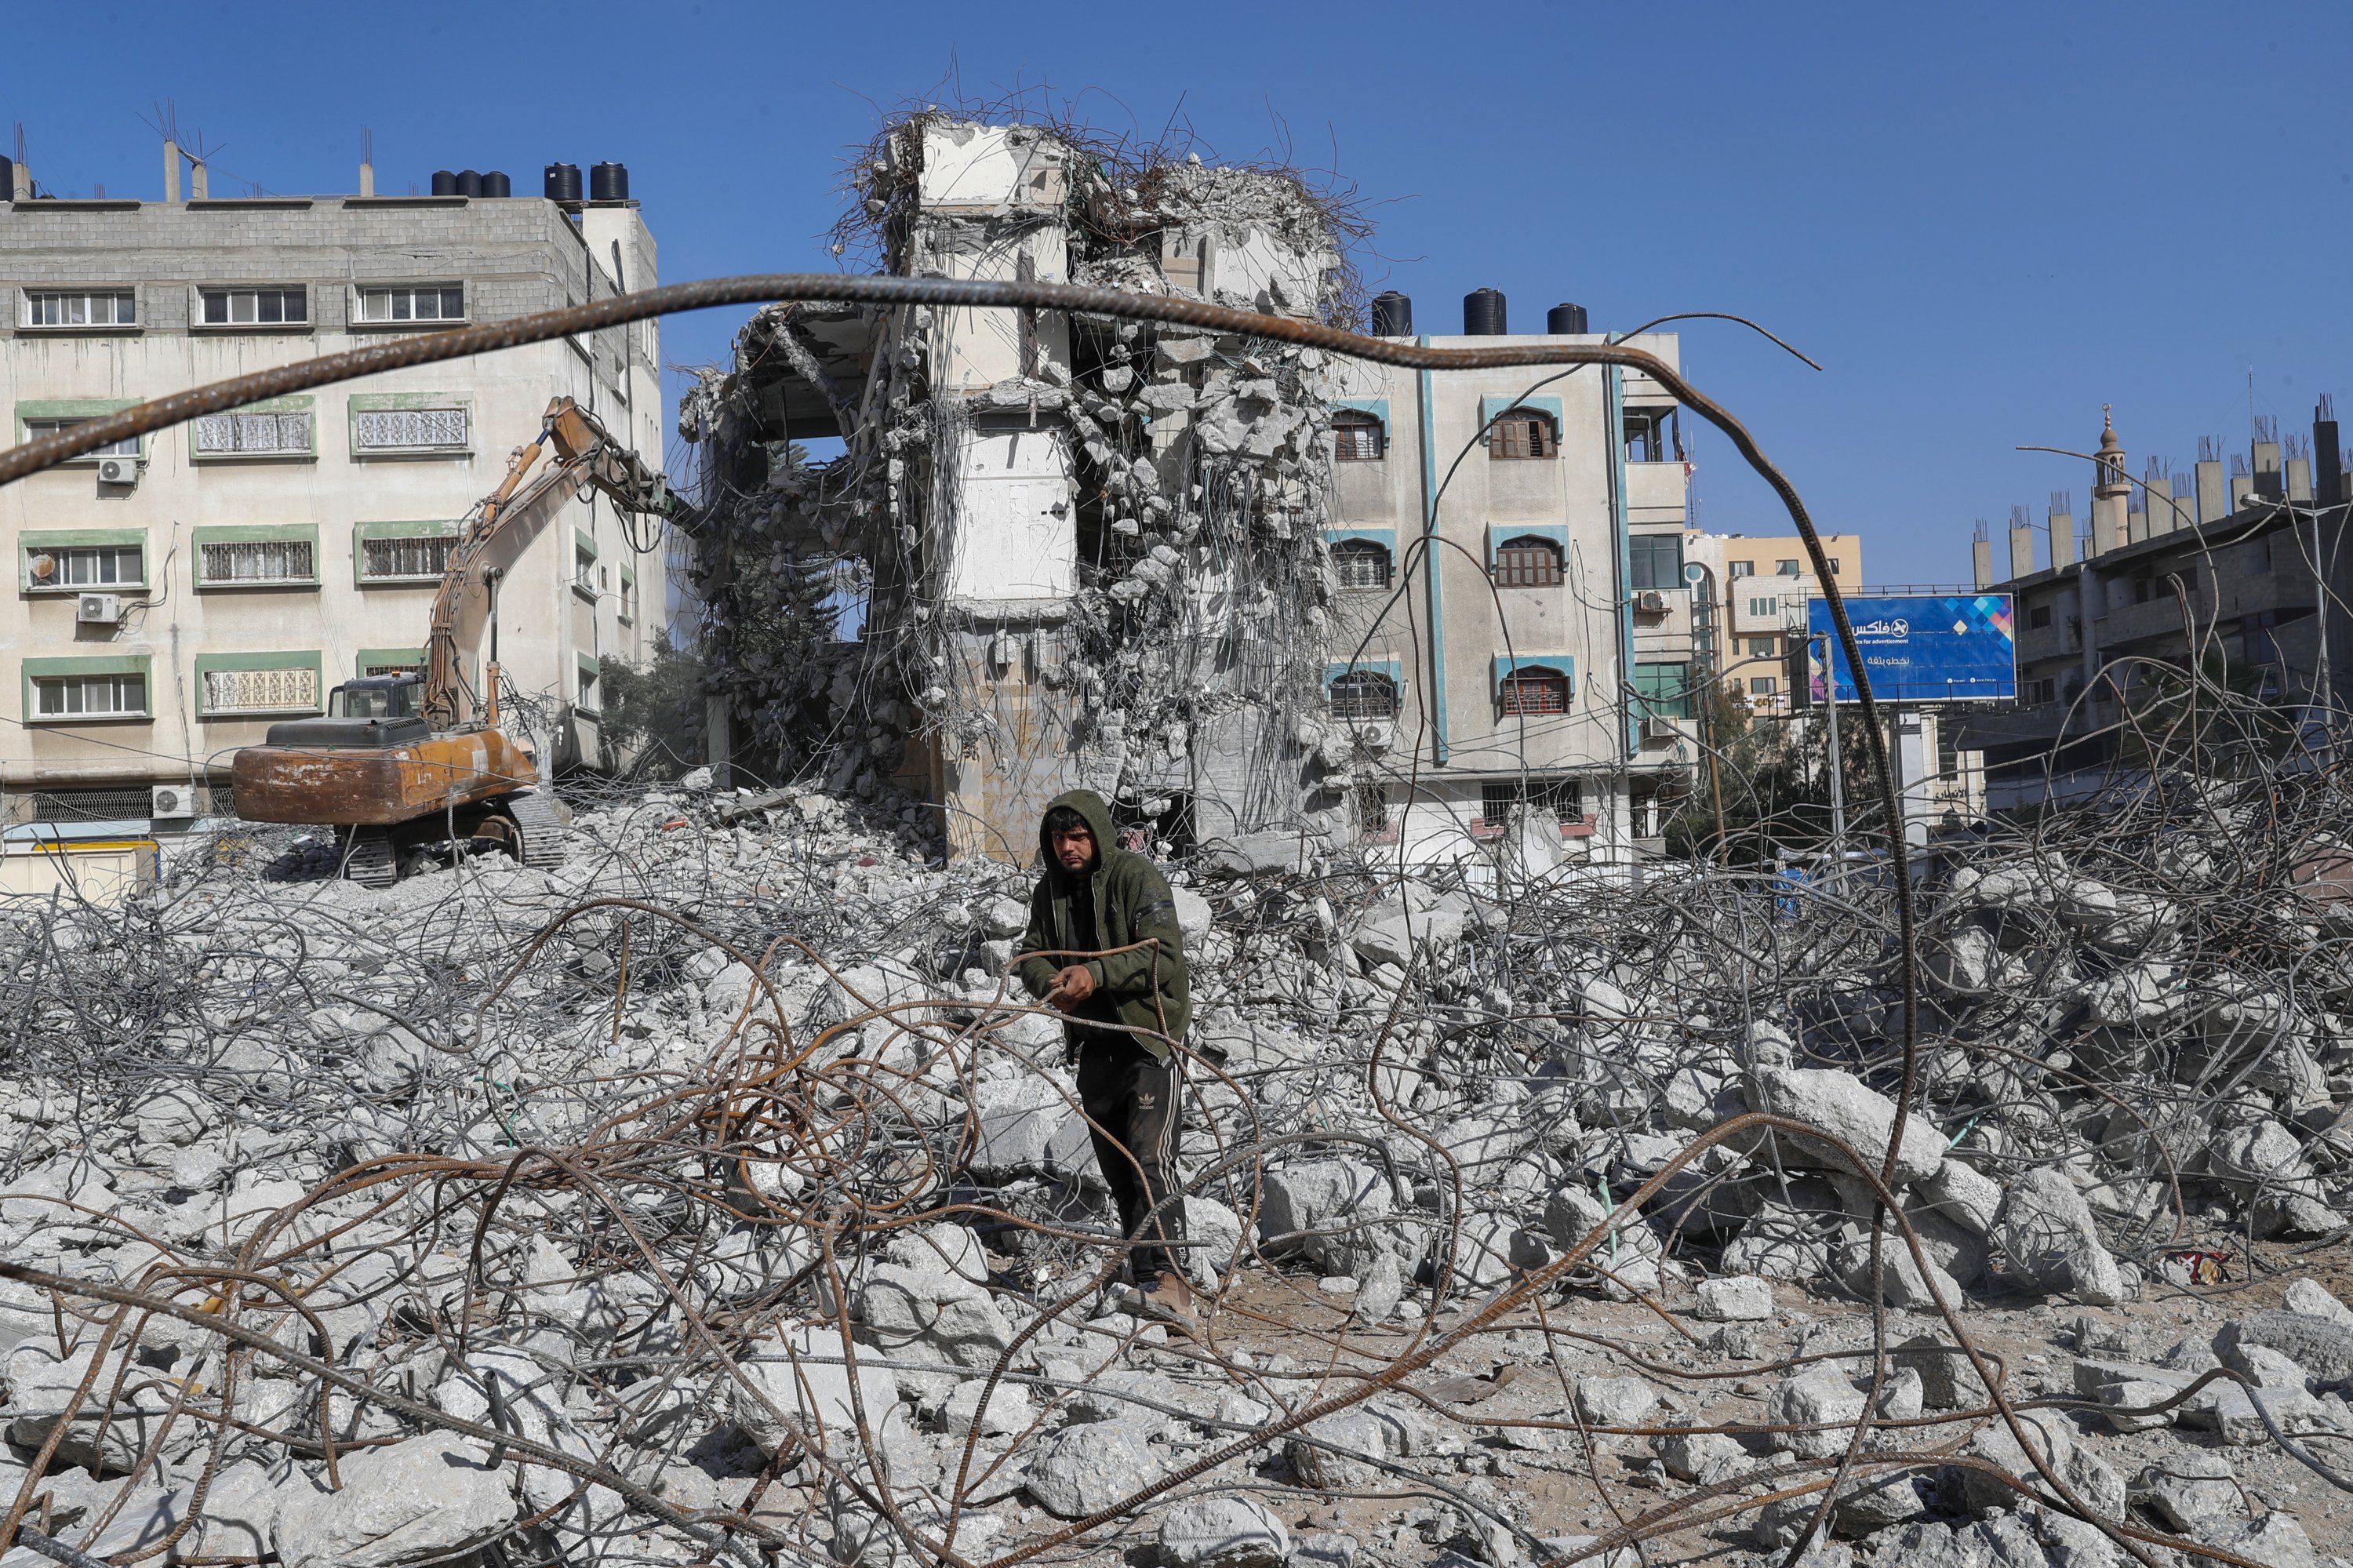 A backhoe breaks and remove parts of the Al-Jawhara building, as a worker recycles metal iron rods from the rubble of the building, which was damaged by Israeli airstrikes during Israel's war with Gaza's Hamas rulers last May, in the central of al-Rimal neighborhood of Gaza City, Jan. 10, 2022. (AP Photo)